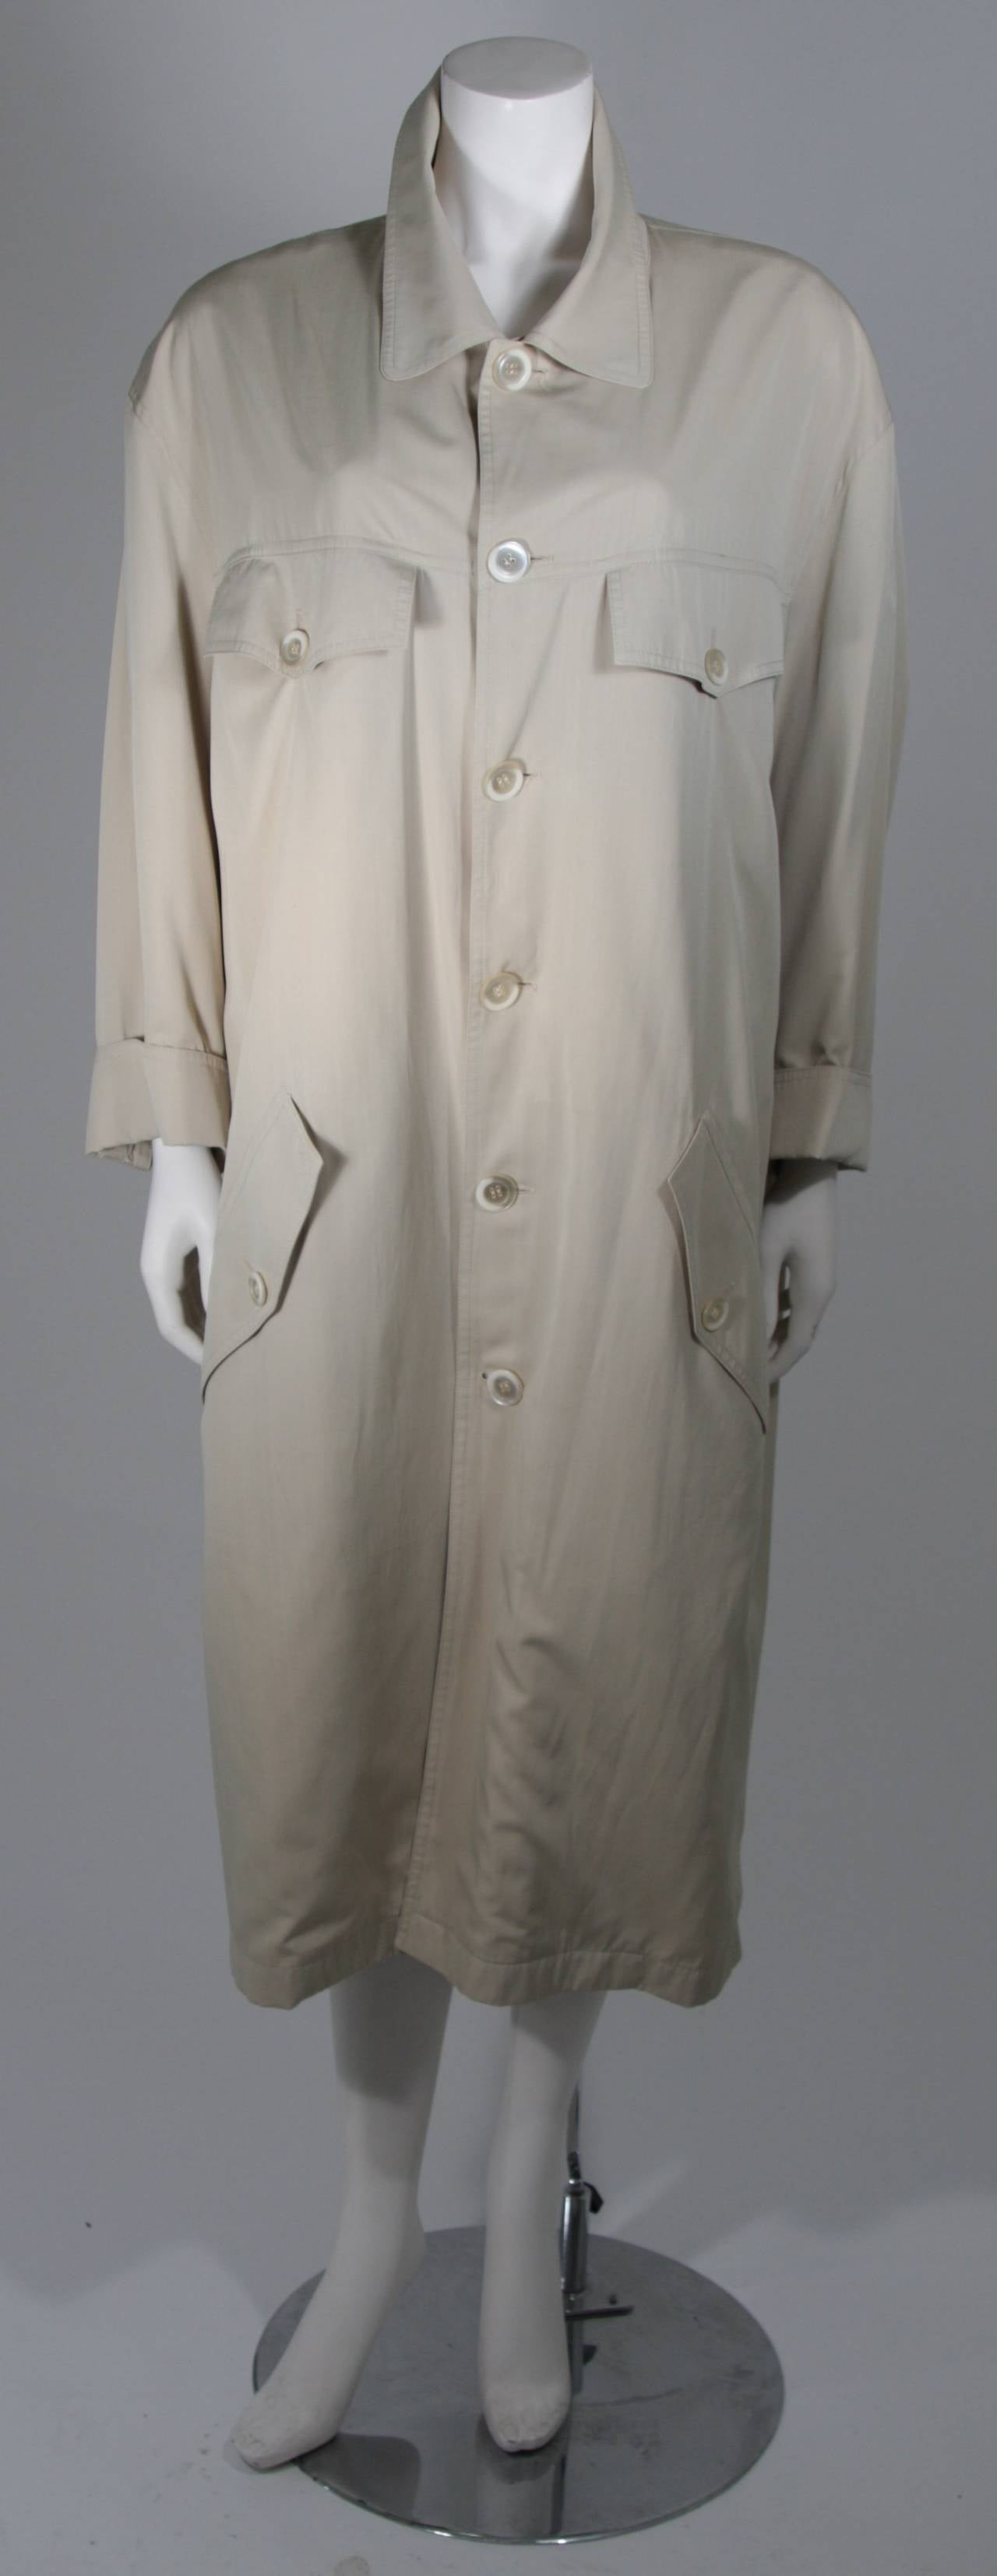 This Pierre Balmain coat is composed of a khaki woven fabric. There are center front button closures and front pockets. Chic over-sized look. In excellent condition. Made in France. 

**Please cross-reference measurements for personal